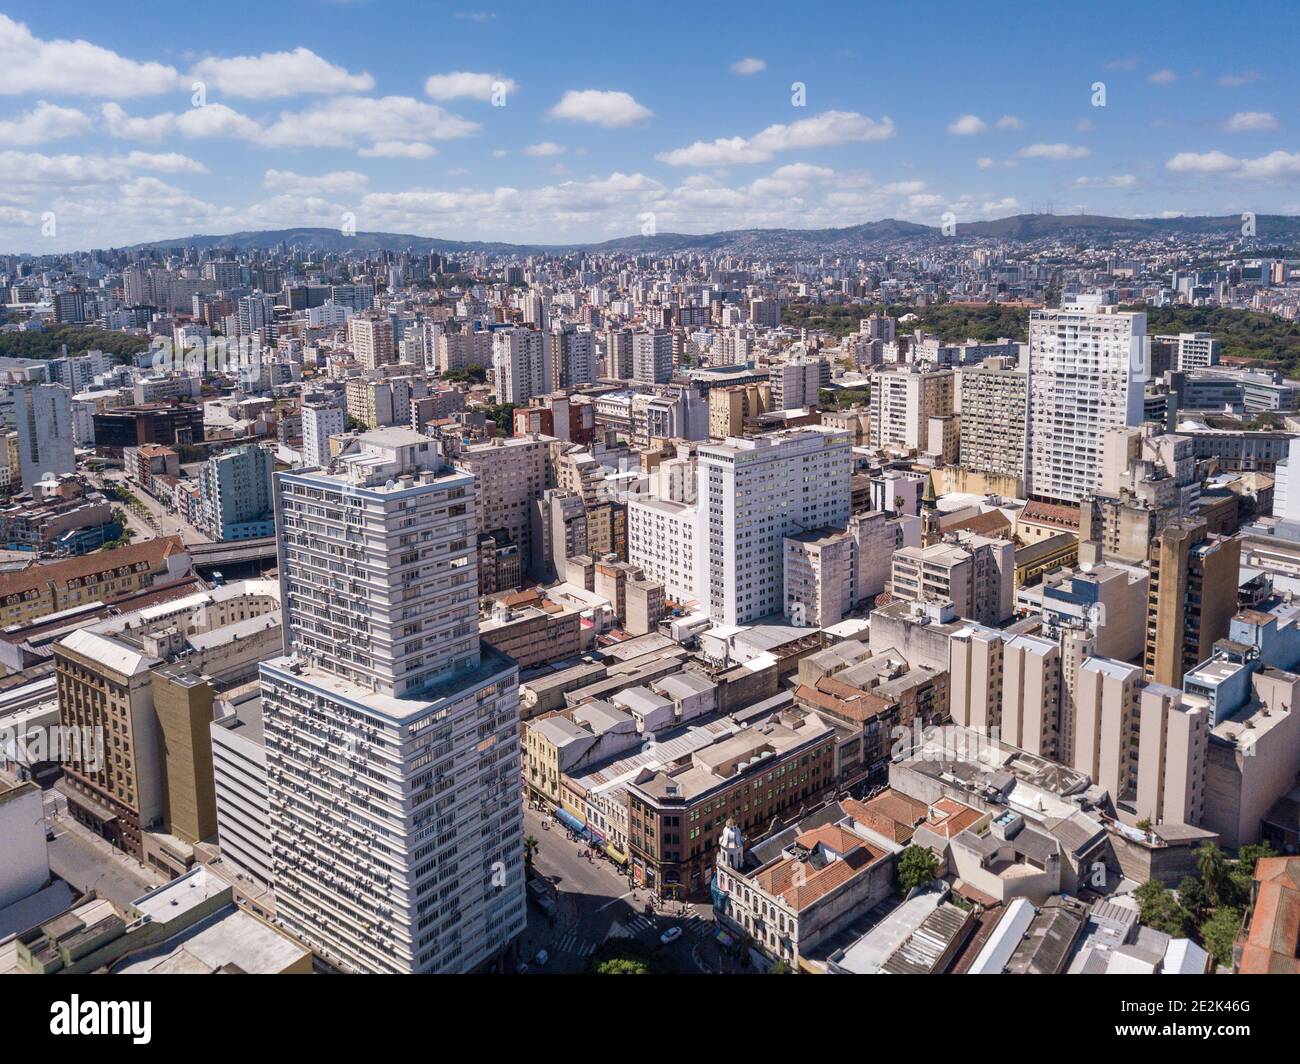 Drone aerial view of buildings skyline of Porto Alegre city, Rio Grande do Sul state, Brazil. Beautiful sunny summer day with blue sky. Concept of urb Stock Photo